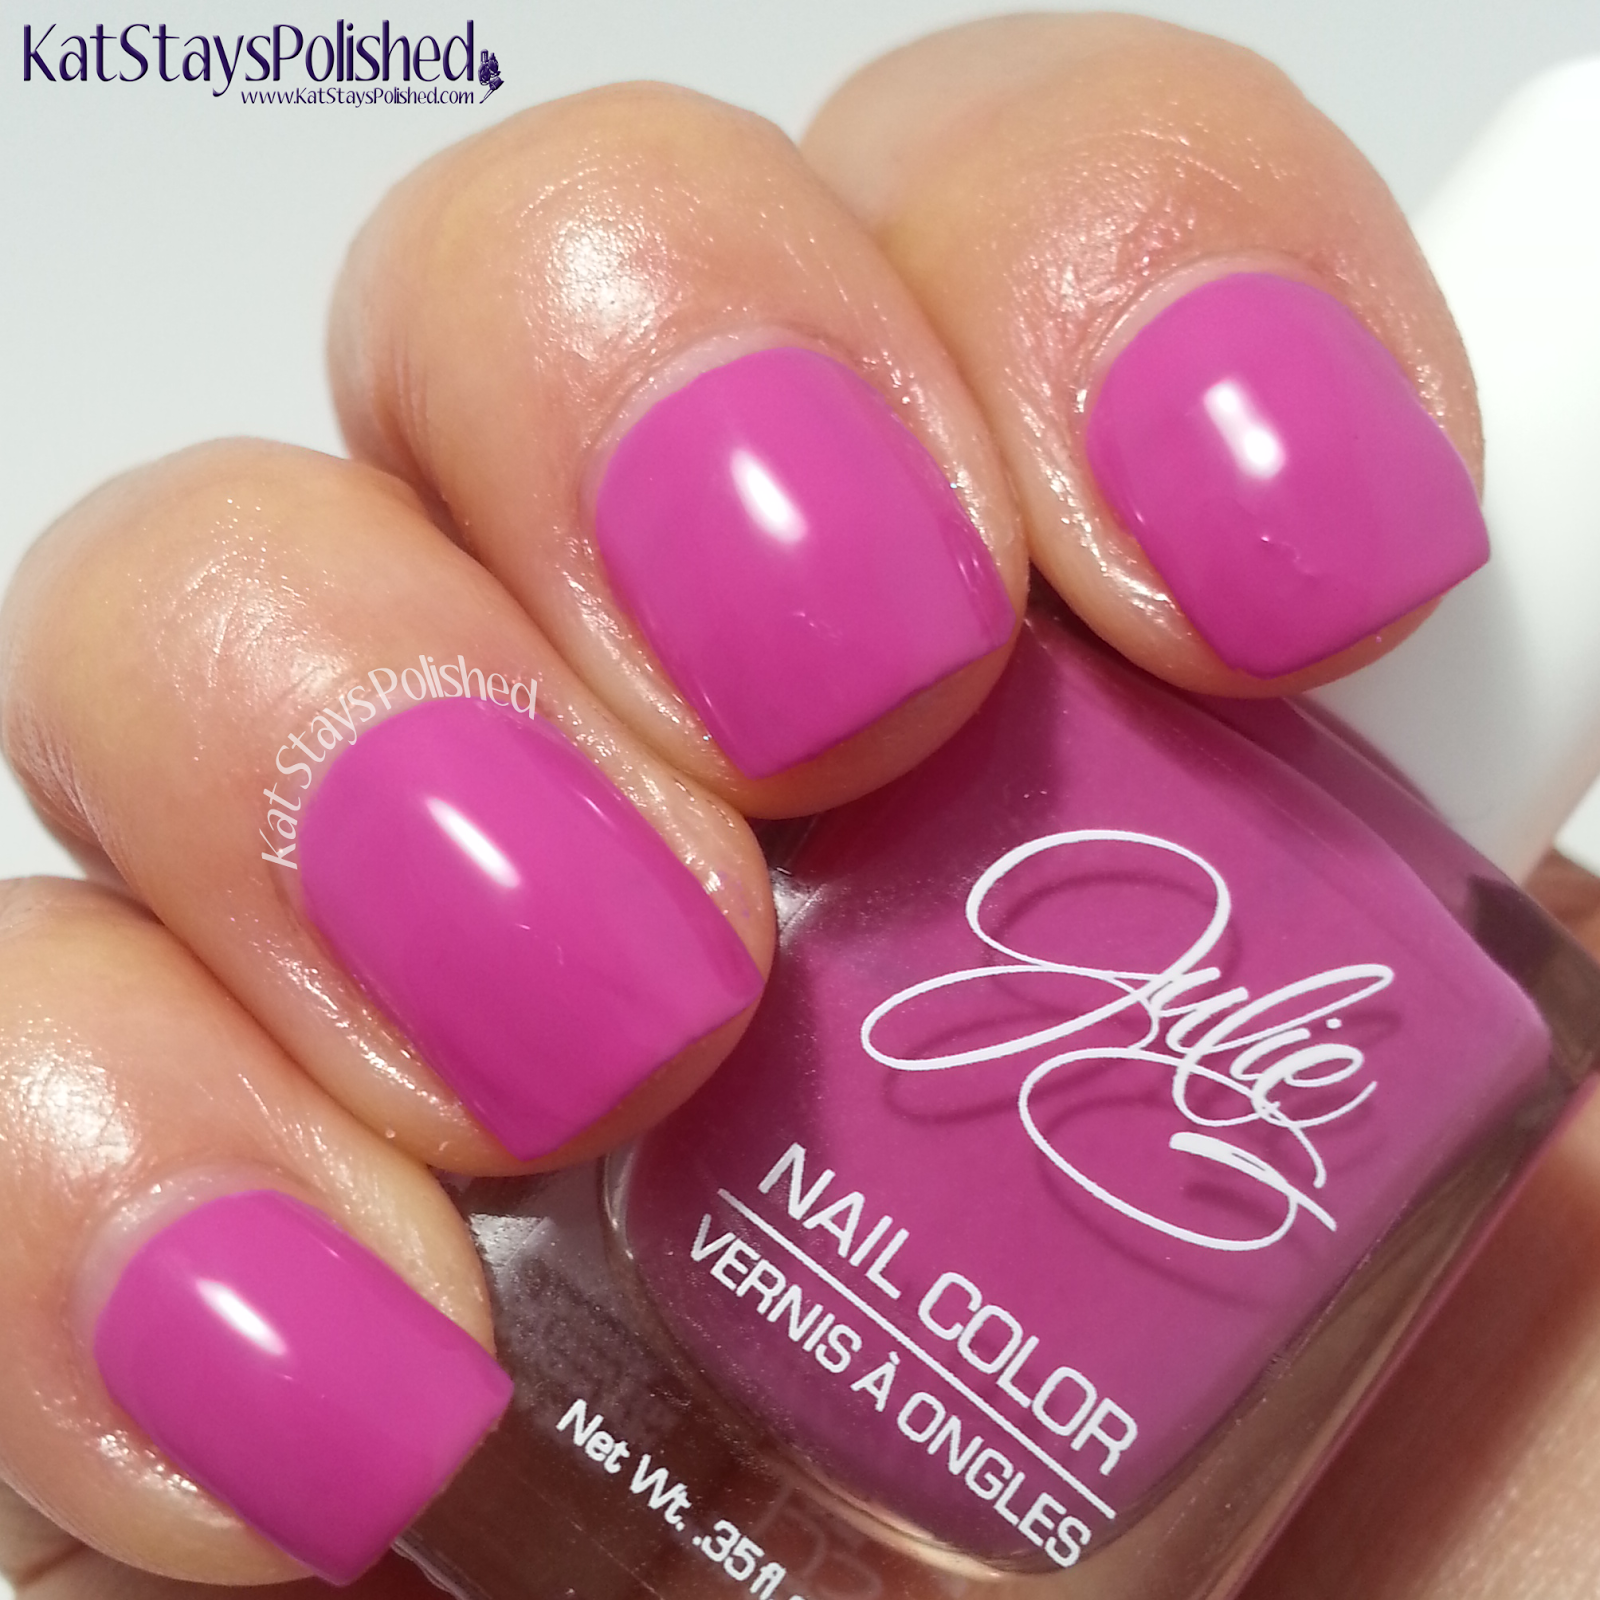 JulieG Cruise Time Collection - Rio de Janeiro | Kat Stays Polished